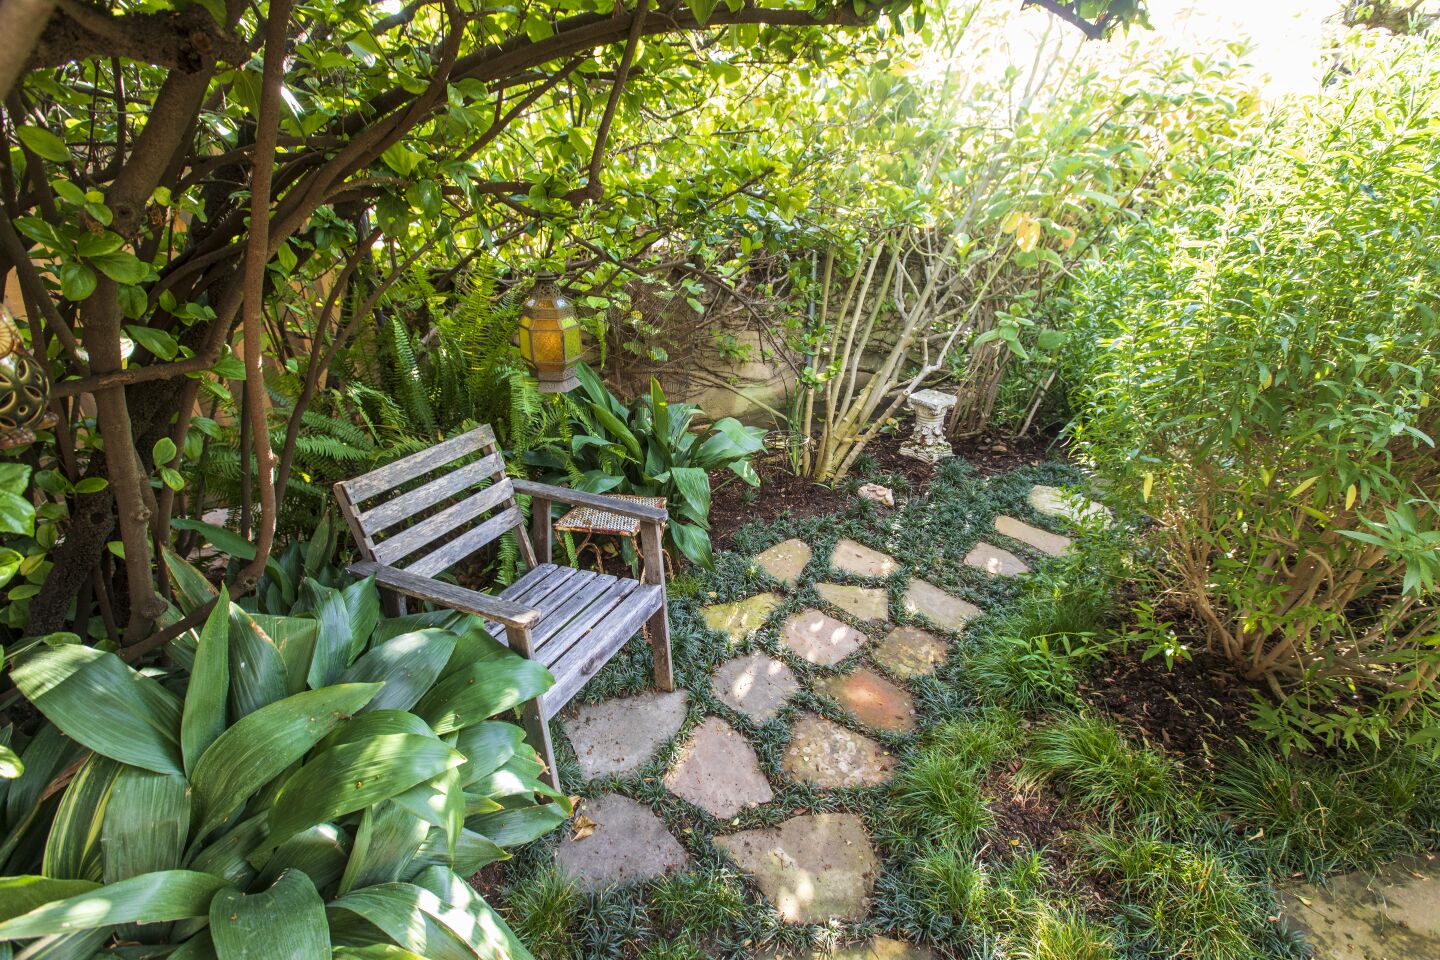 A stone path in a garden next to a chair